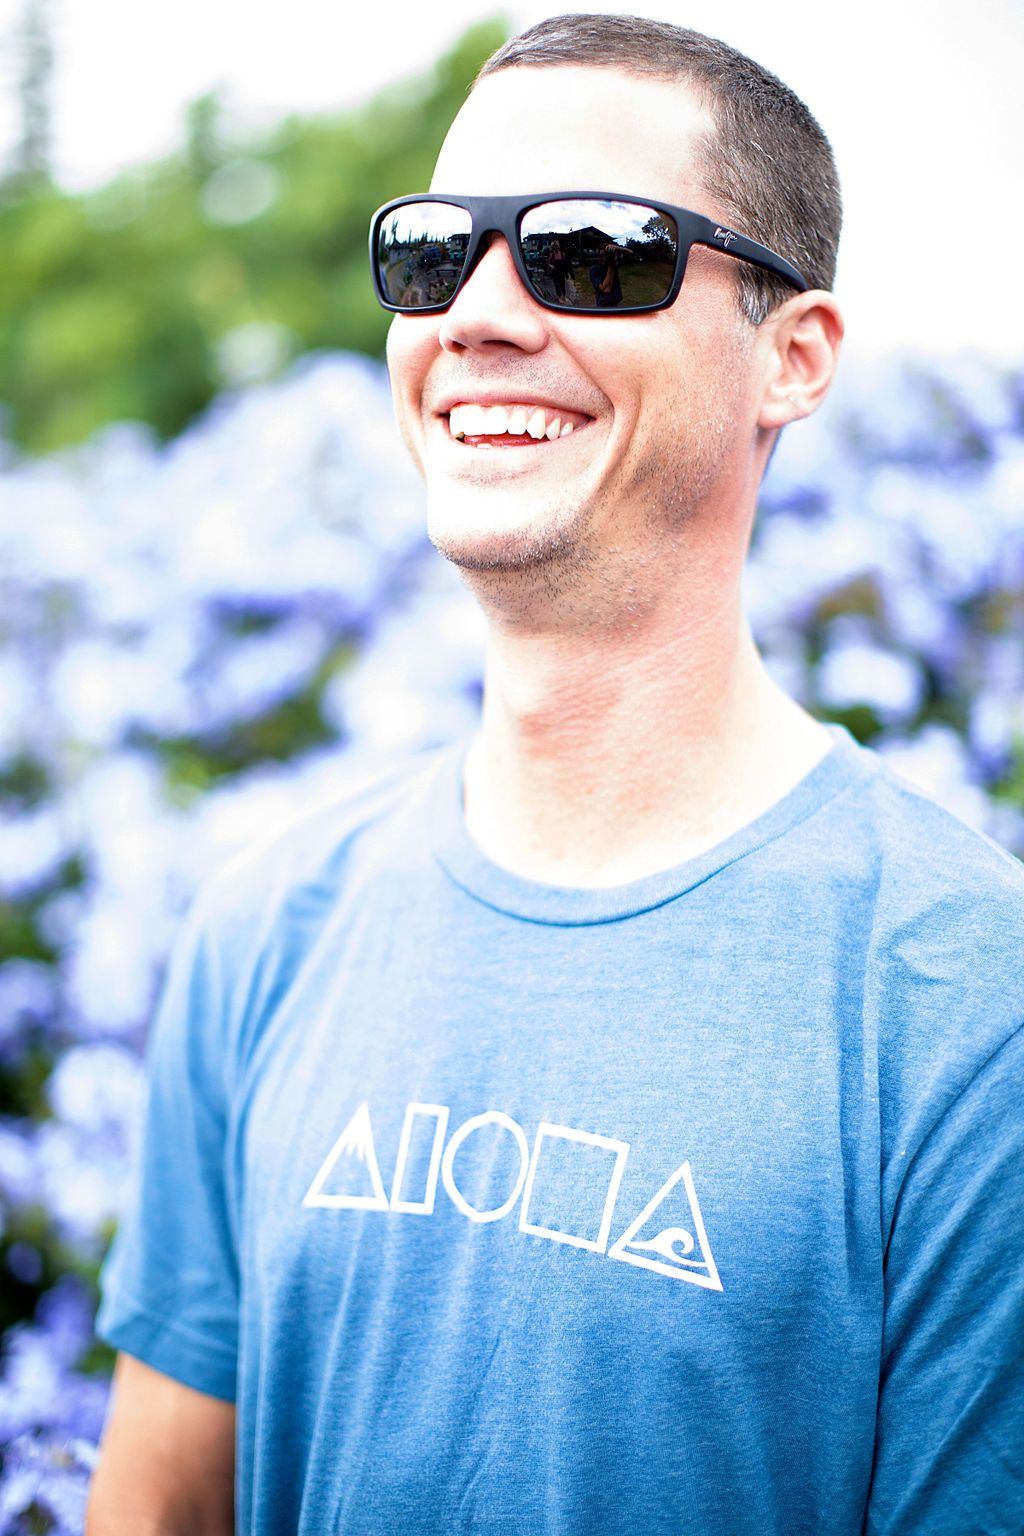 Man laughing wearing our Mauka to Makai Aloha Shapes sueded jersey tee in heather deep teal